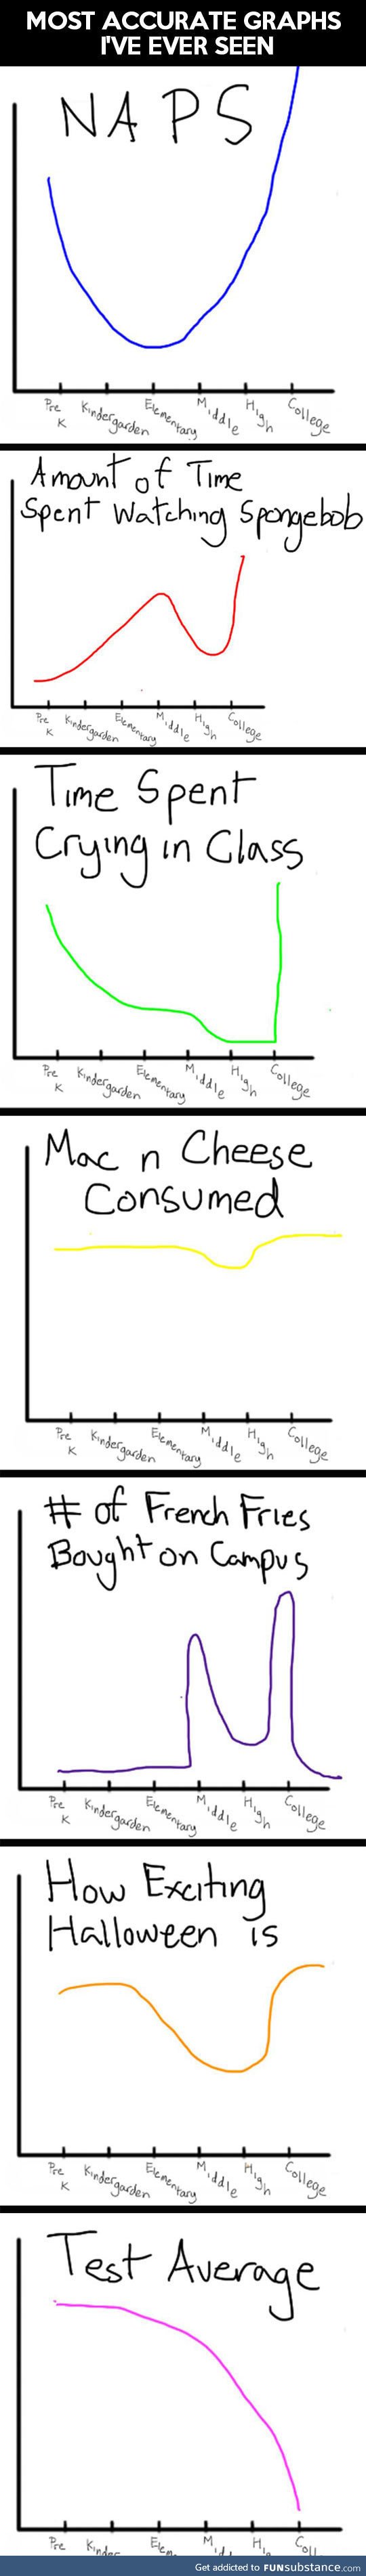 Accurate graphs